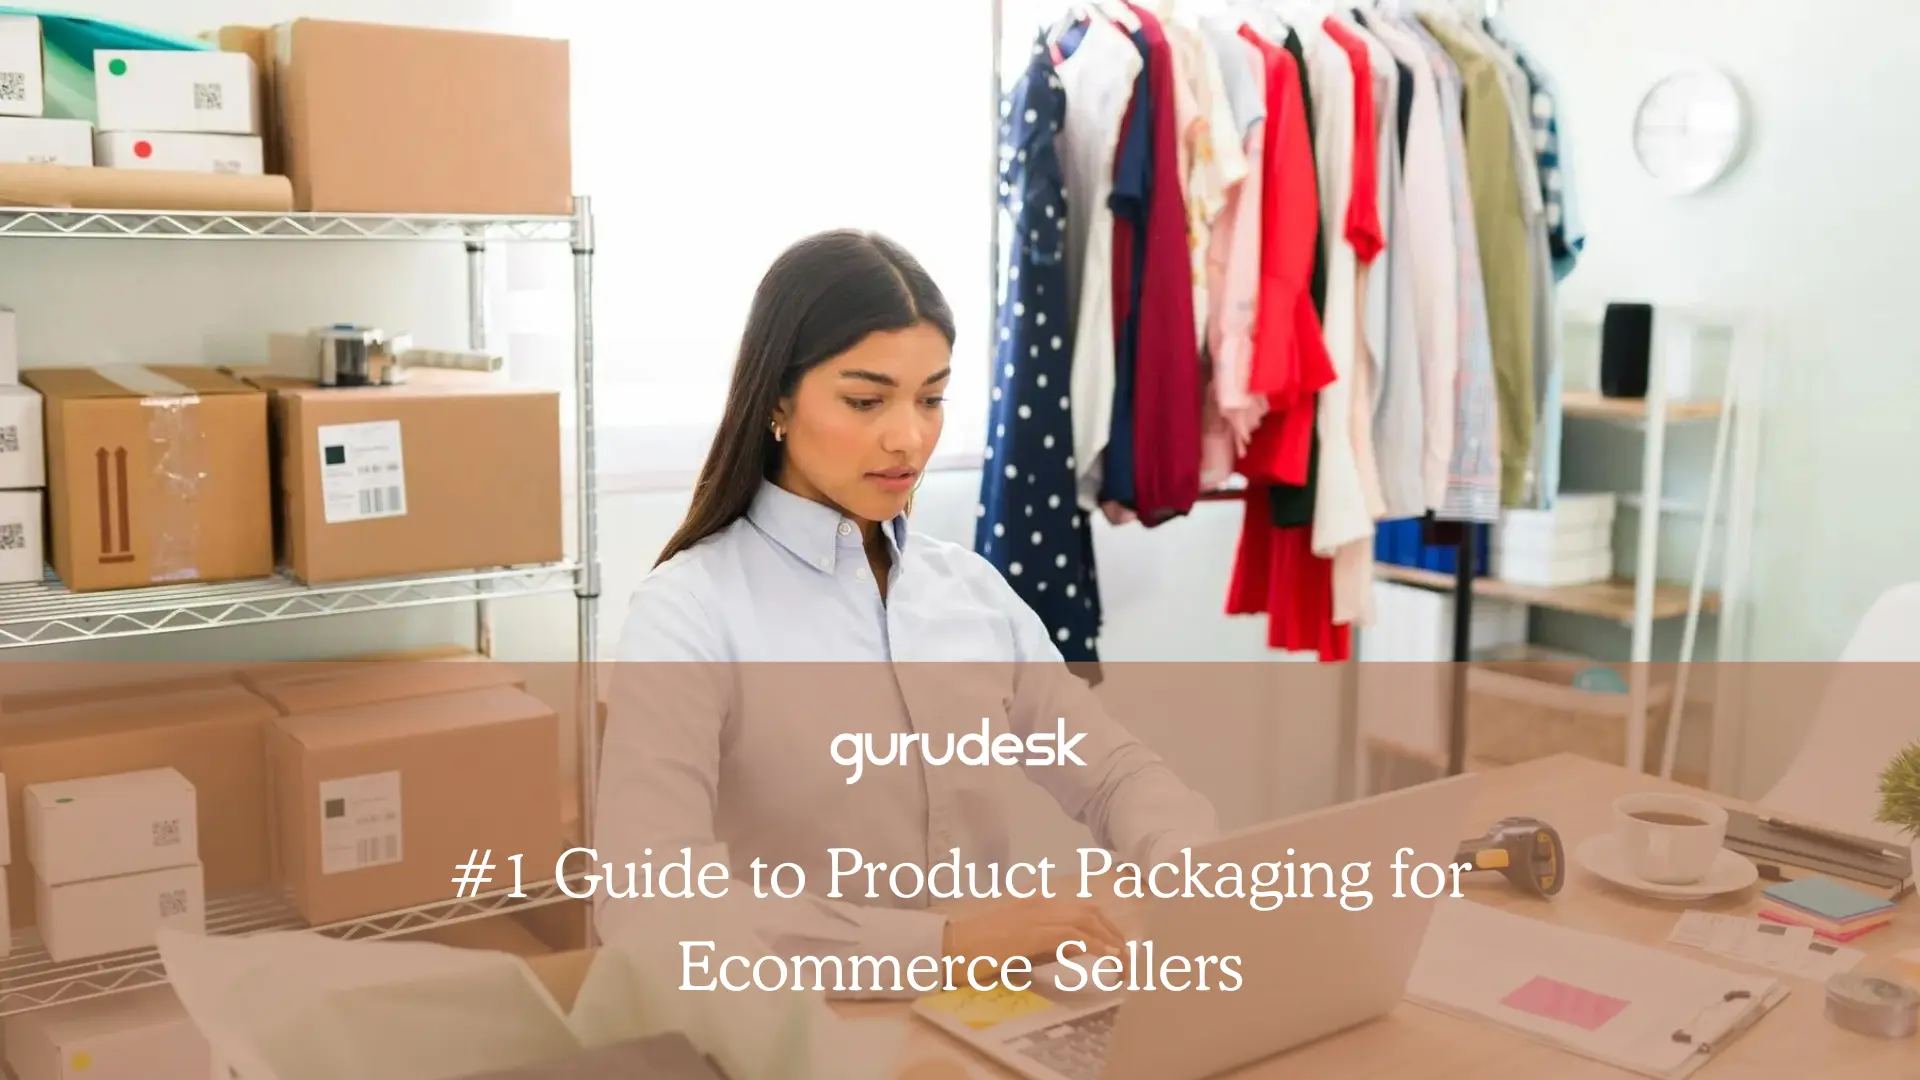 1 Guide to Product Packaging for Ecommerce Sellers